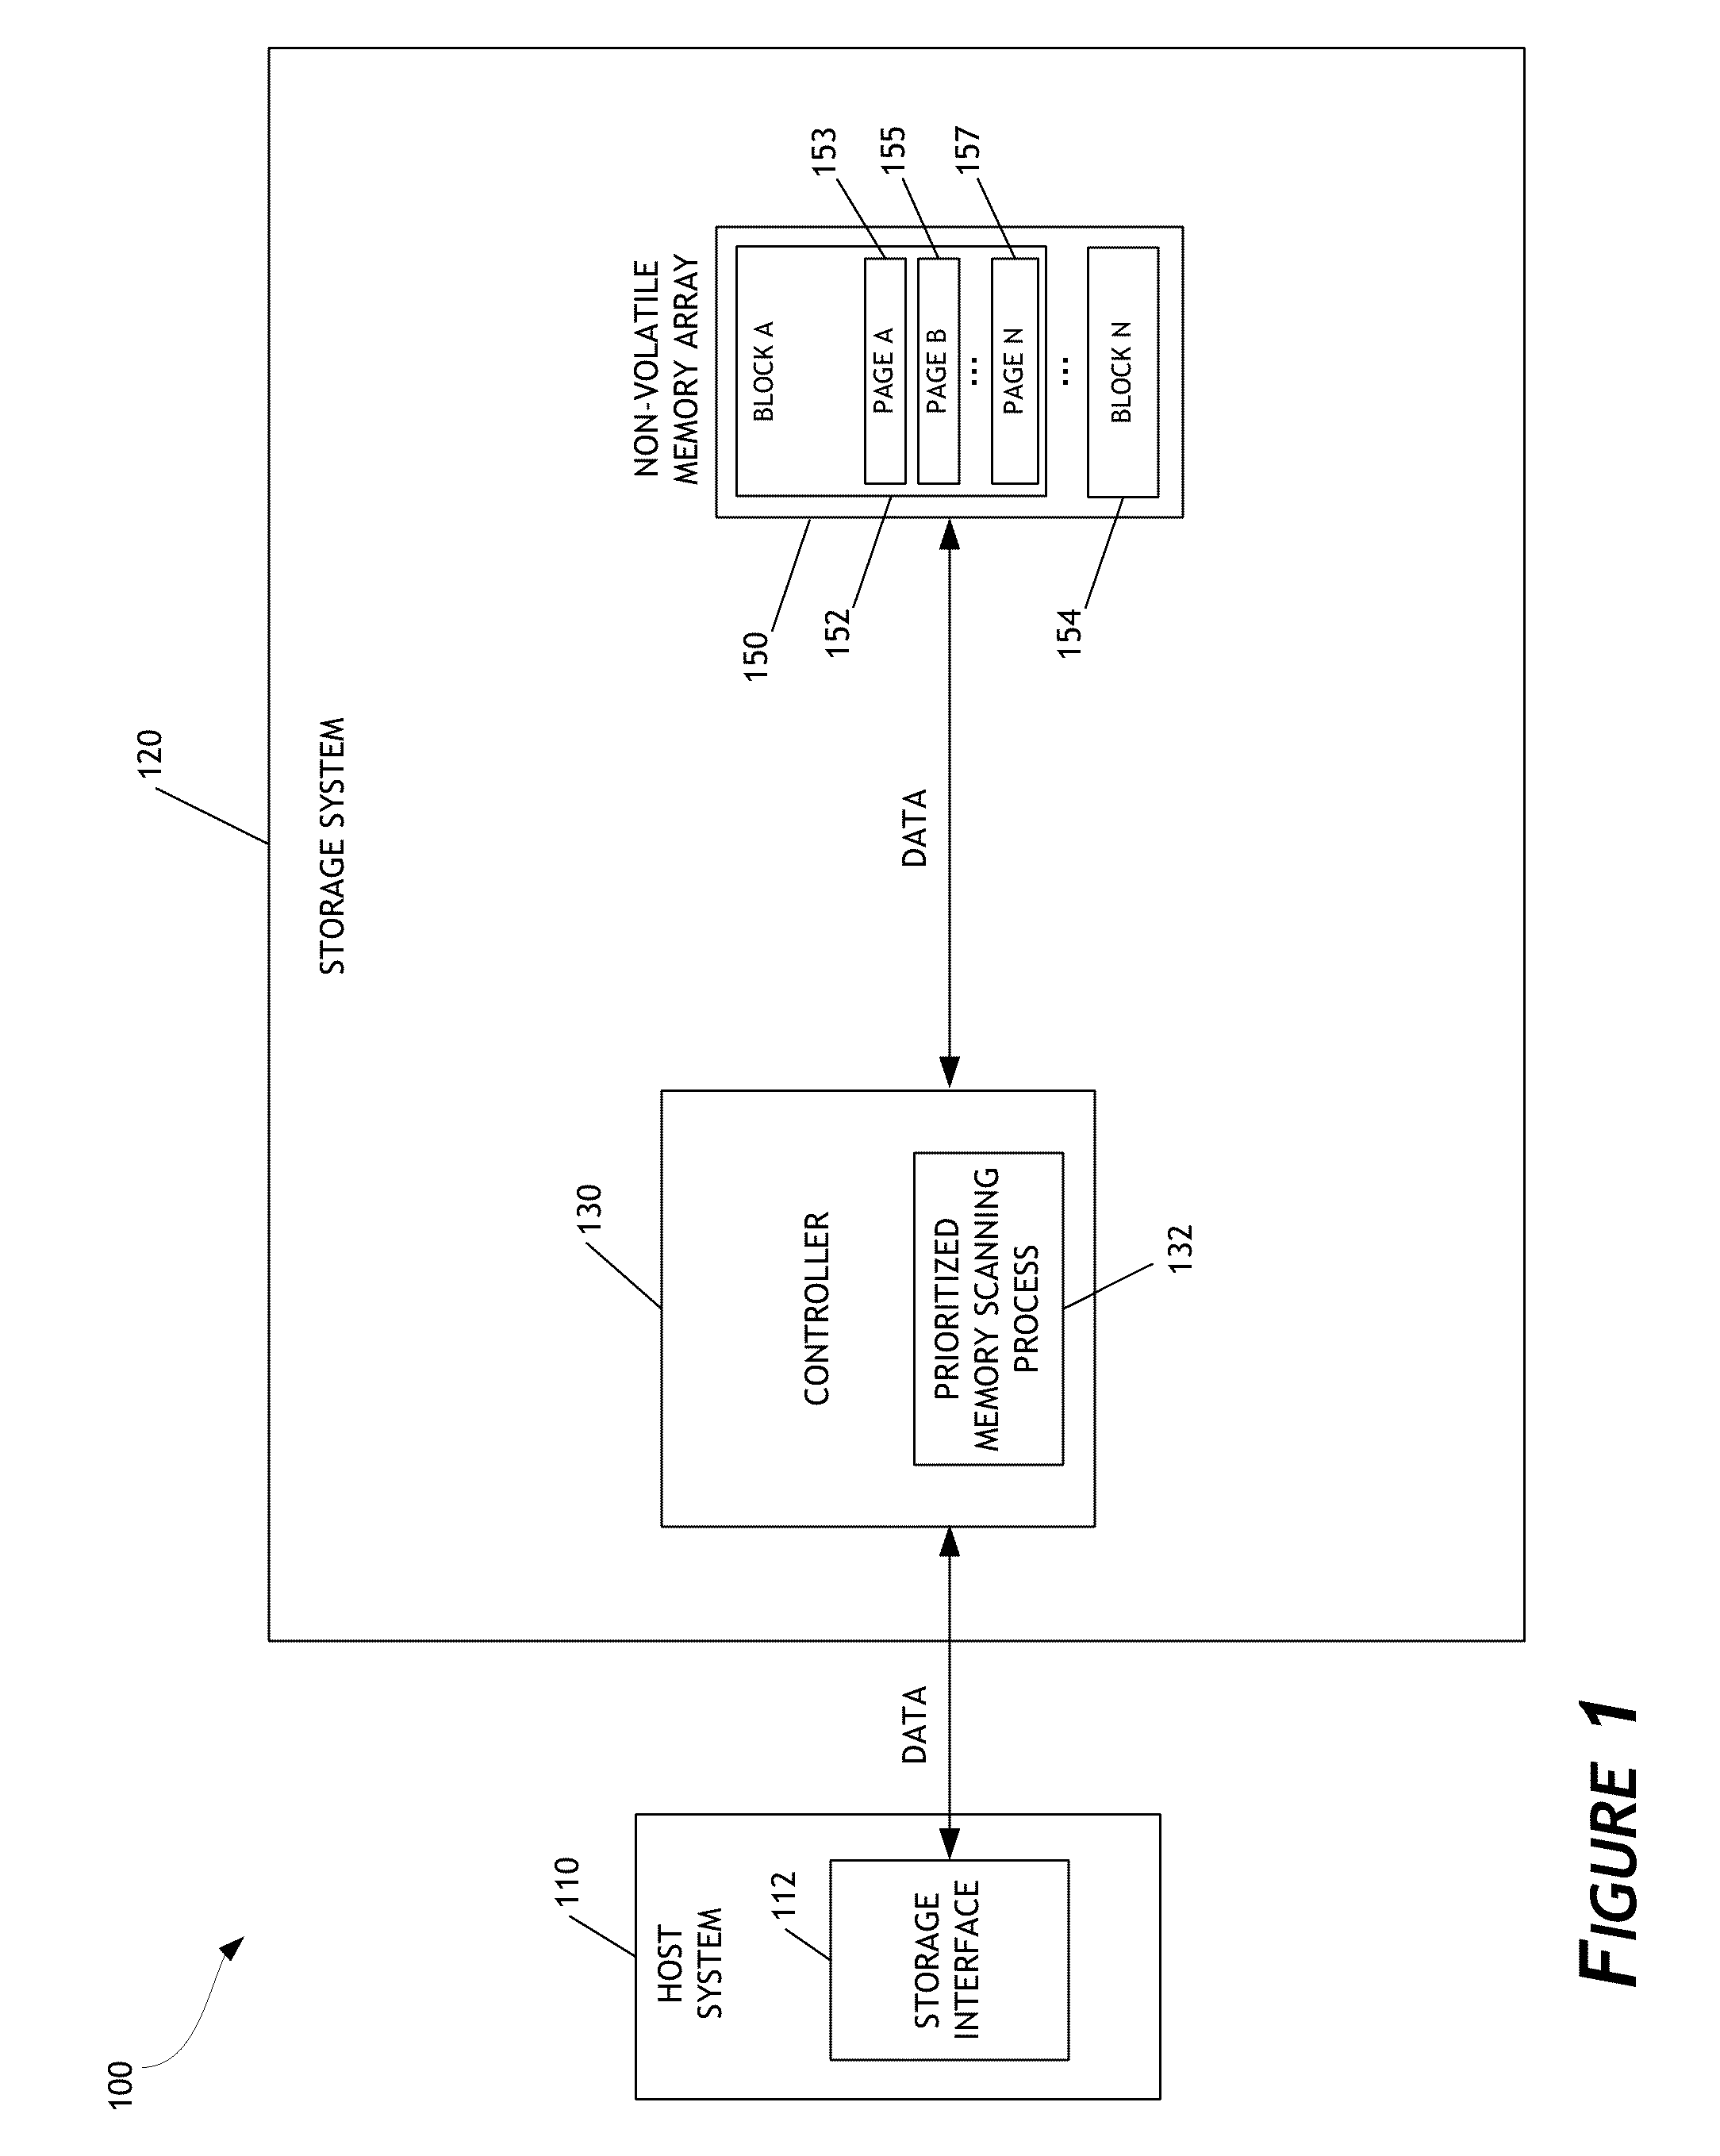 Prioritized memory scanning for data storage systems